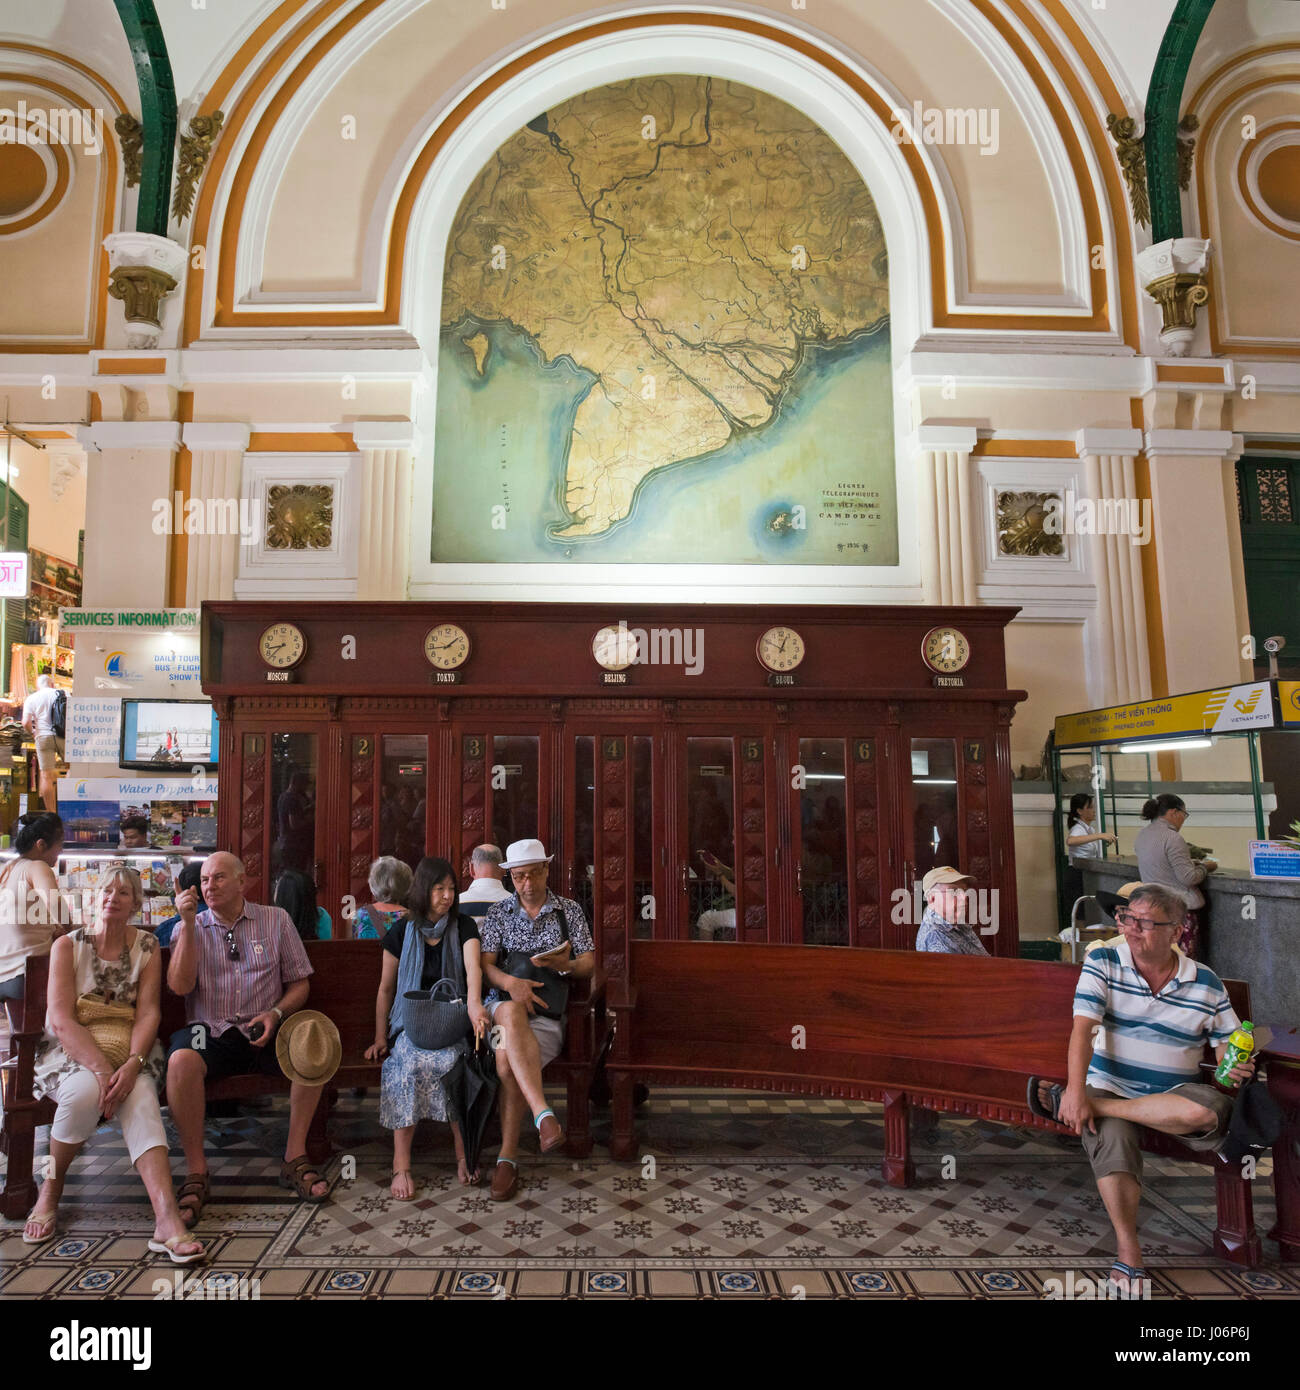 Square interior view of Saigon Central Post Office in Ho Chi Minh City, HCMC, Vietnam. Stock Photo